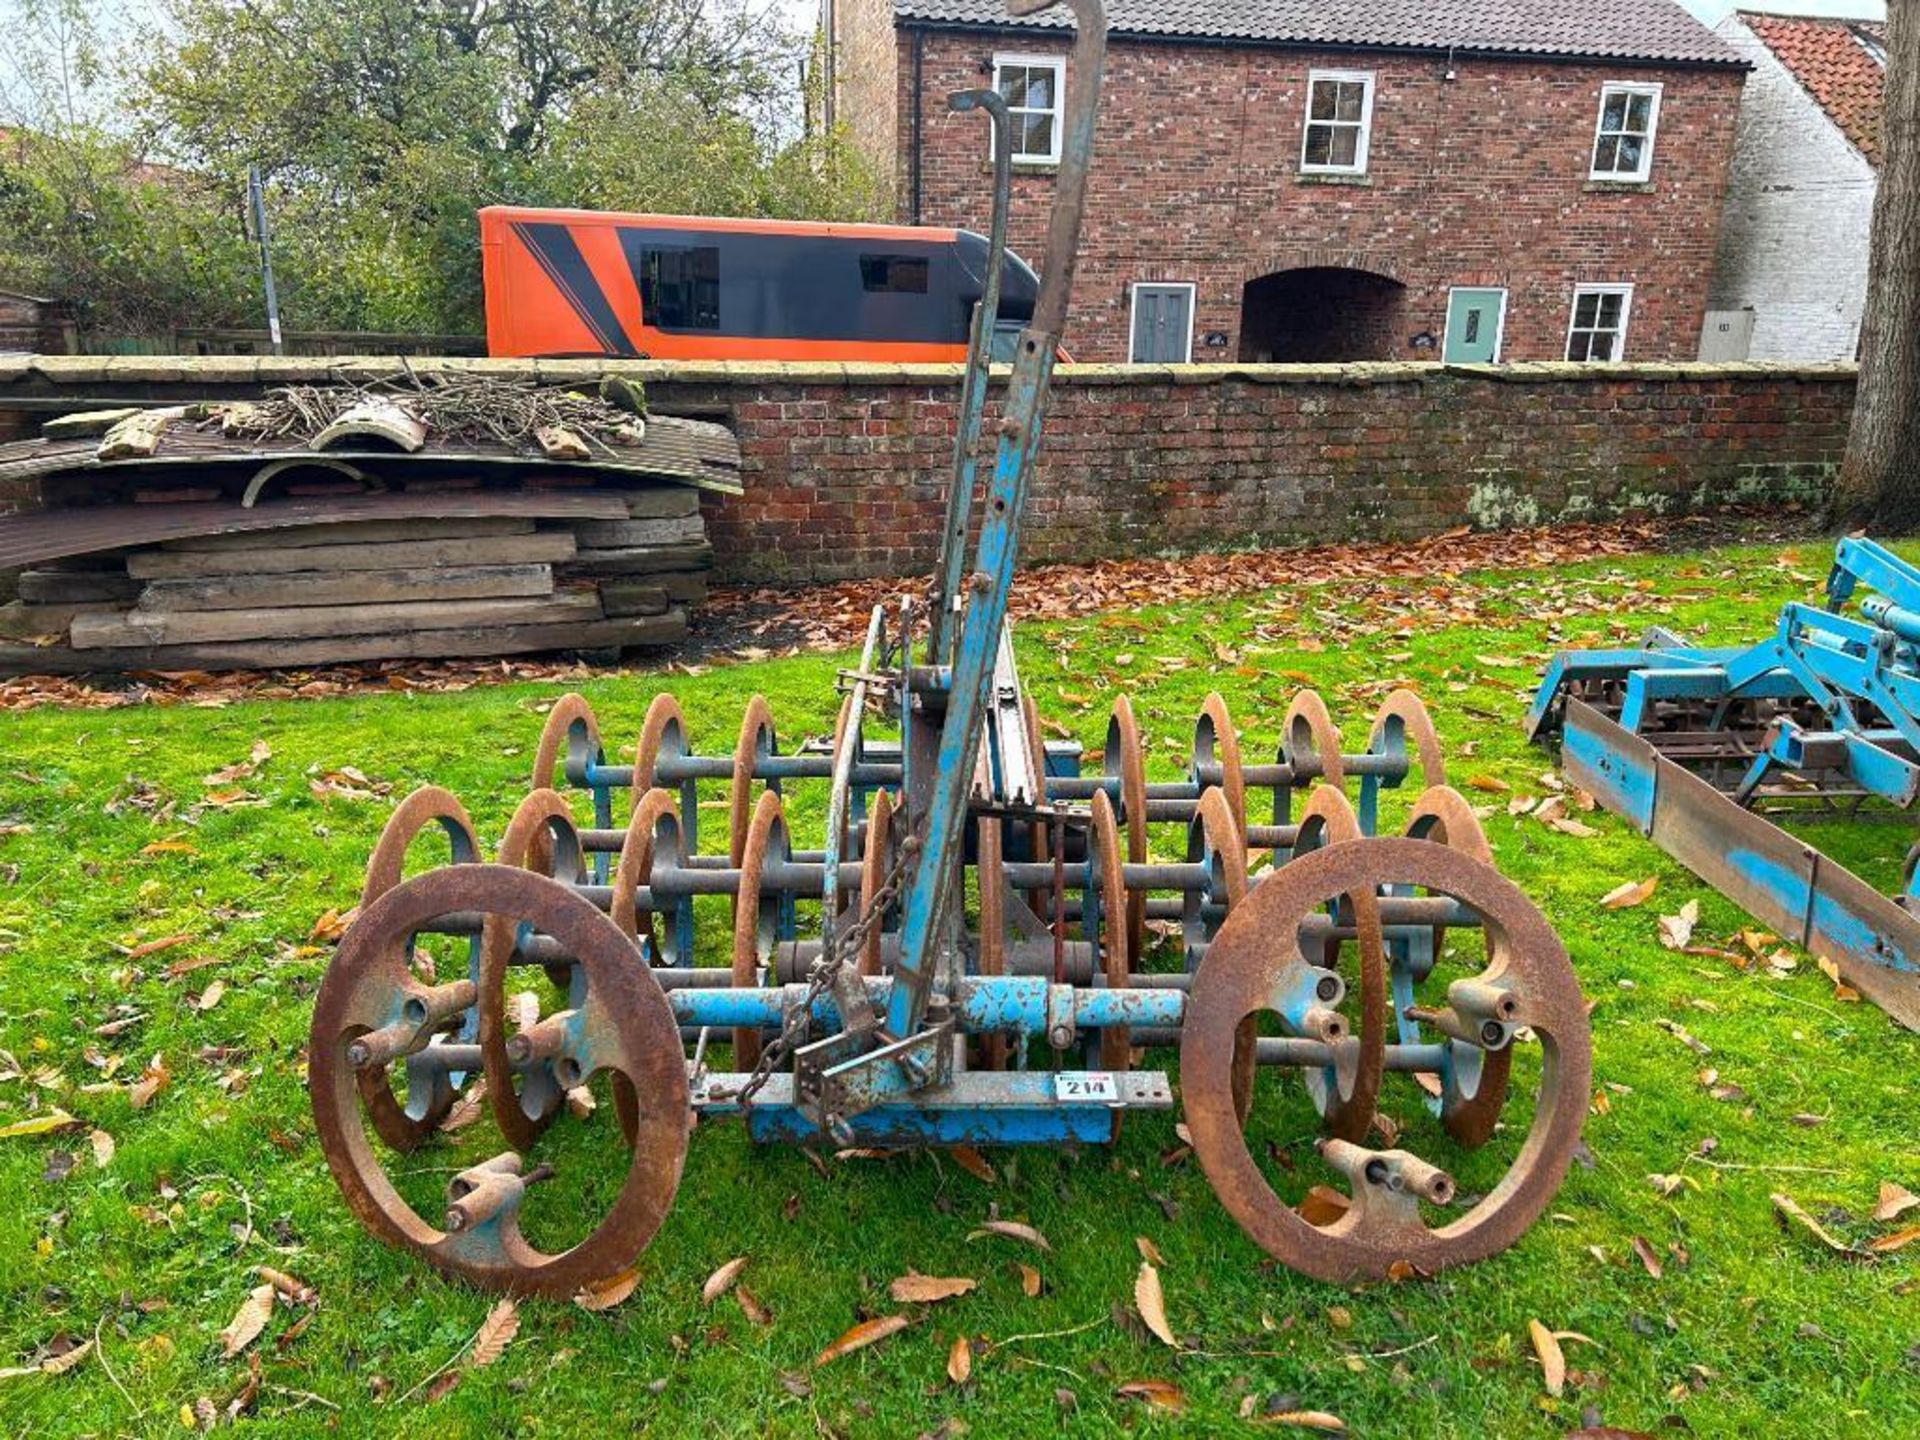 1985 Lemken 1.82m press on 3 point linkage frame, c/w 2 press rings. On farm from new. Serial No: 00